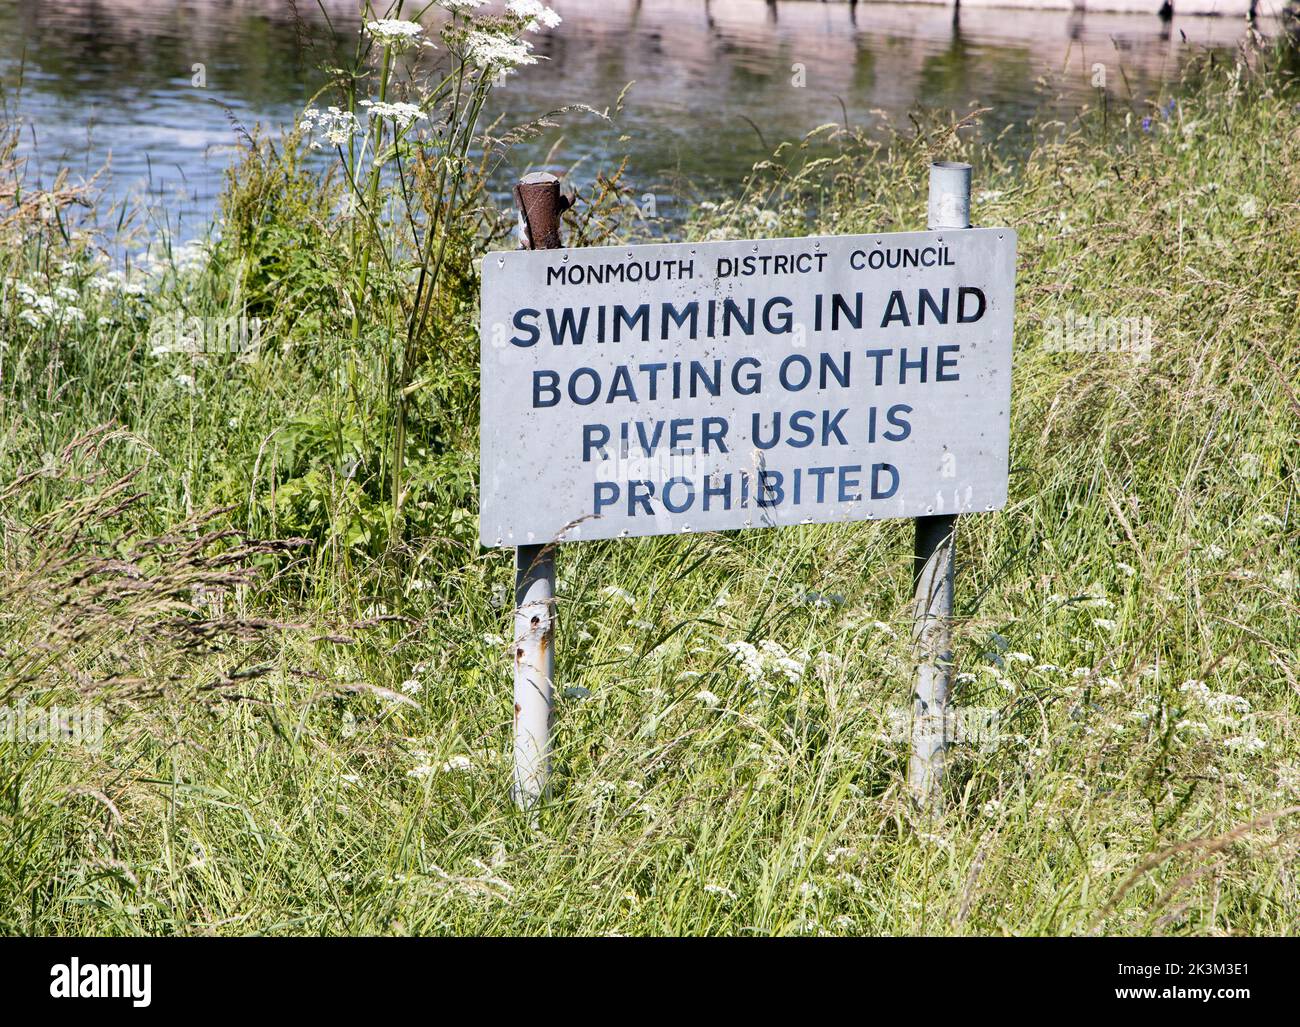 Warning sign prohibiting wild swimming and boating in the River Usk at Abergavenny, Wales, UK Stock Photo